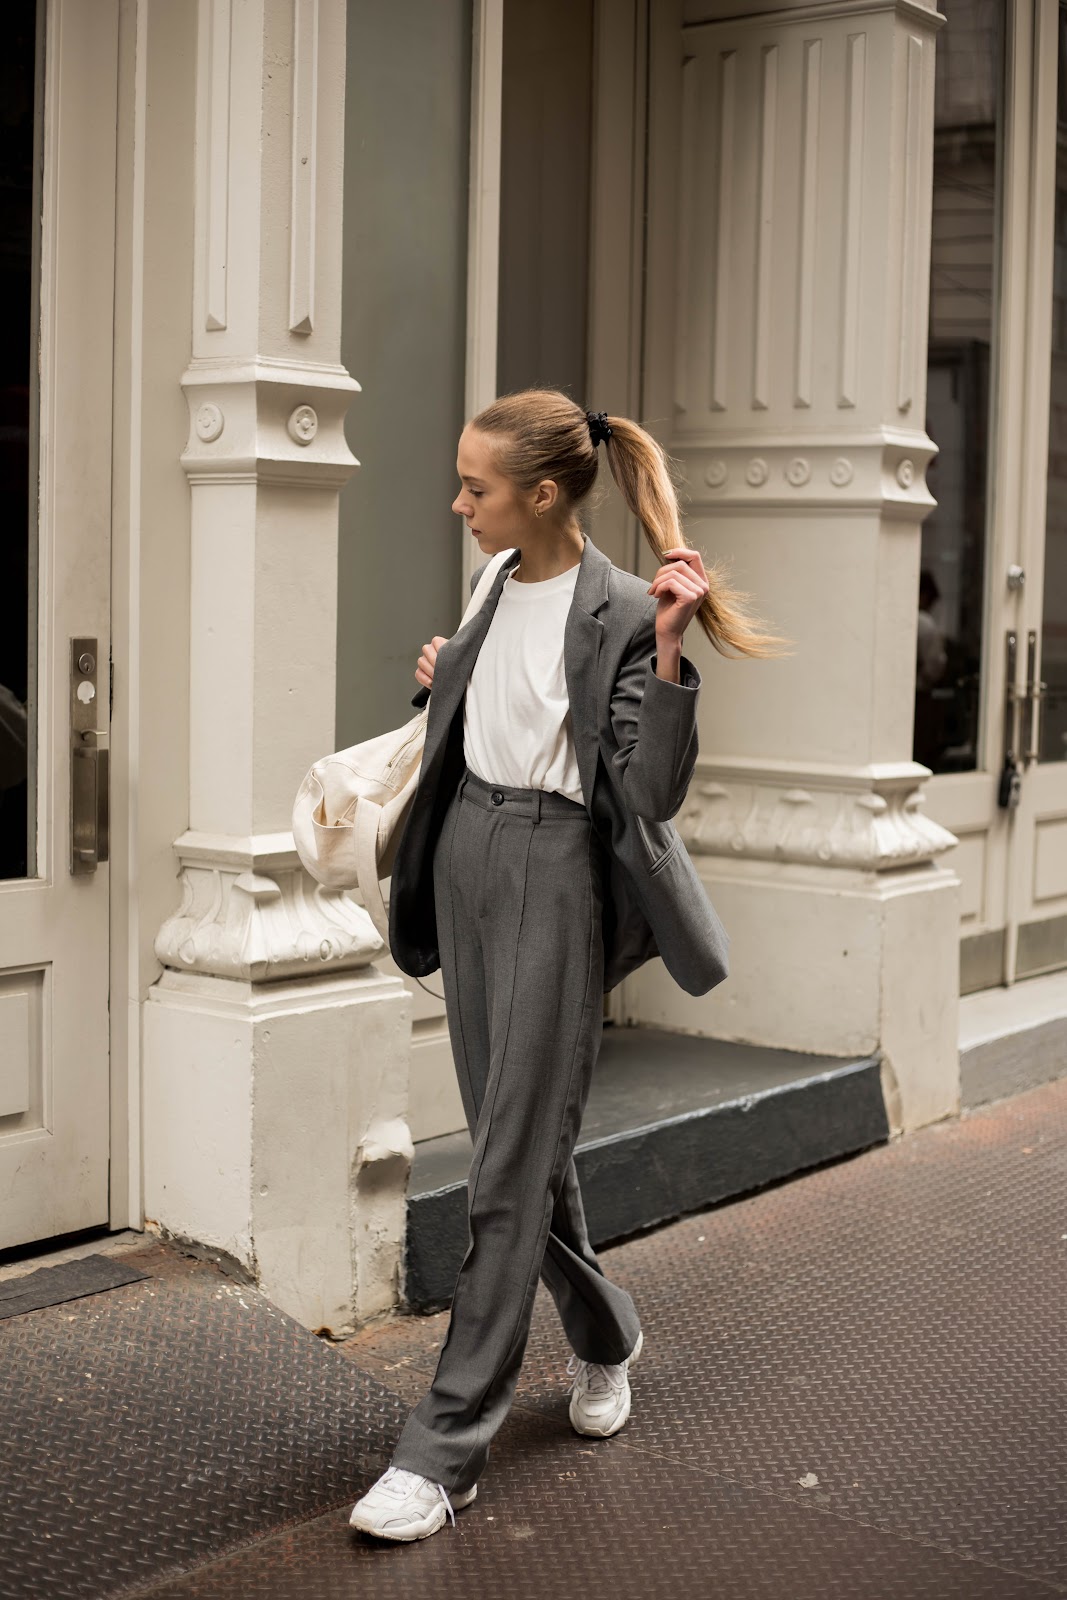 Sporttinen asu, harmaa puku // Sporty outfit with grey suit